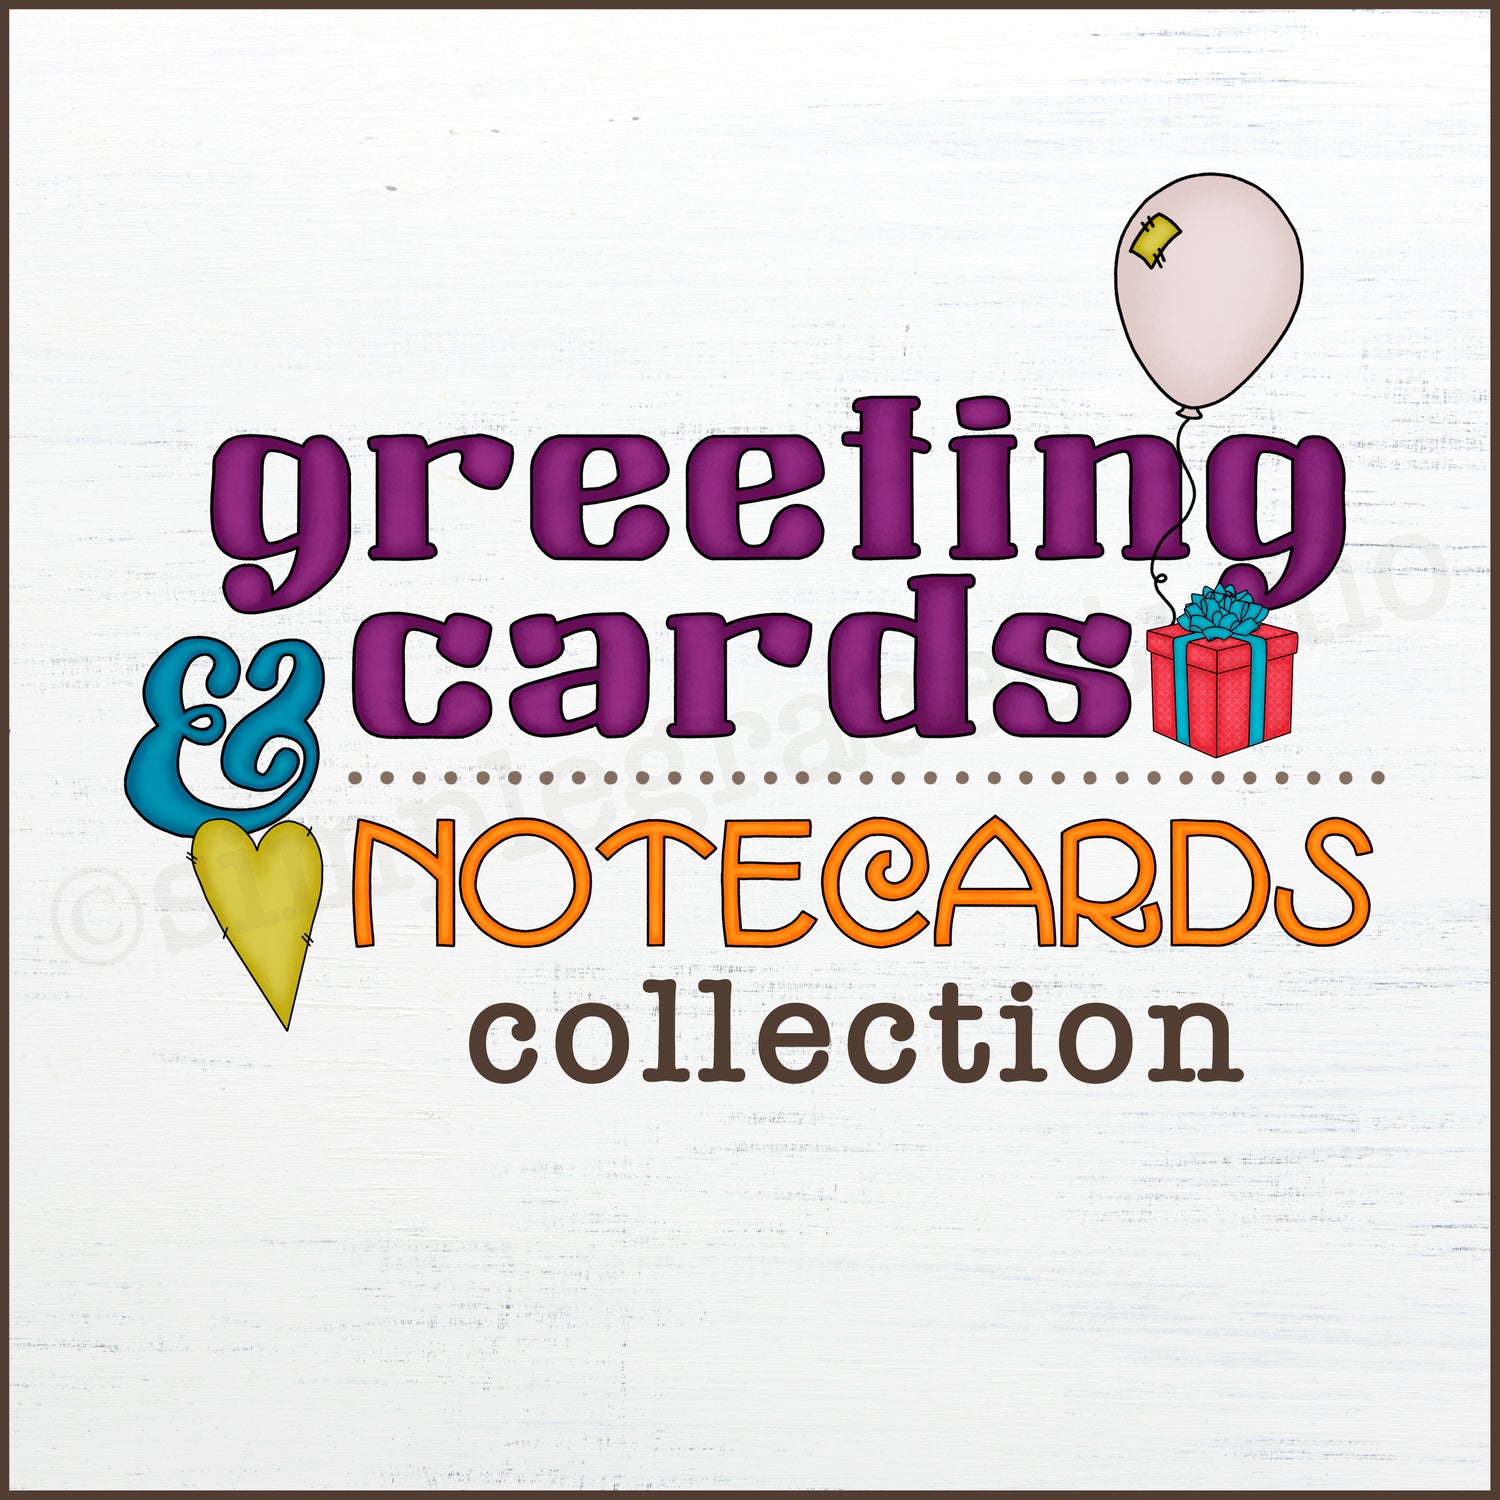 Greeting Cards & Notecards